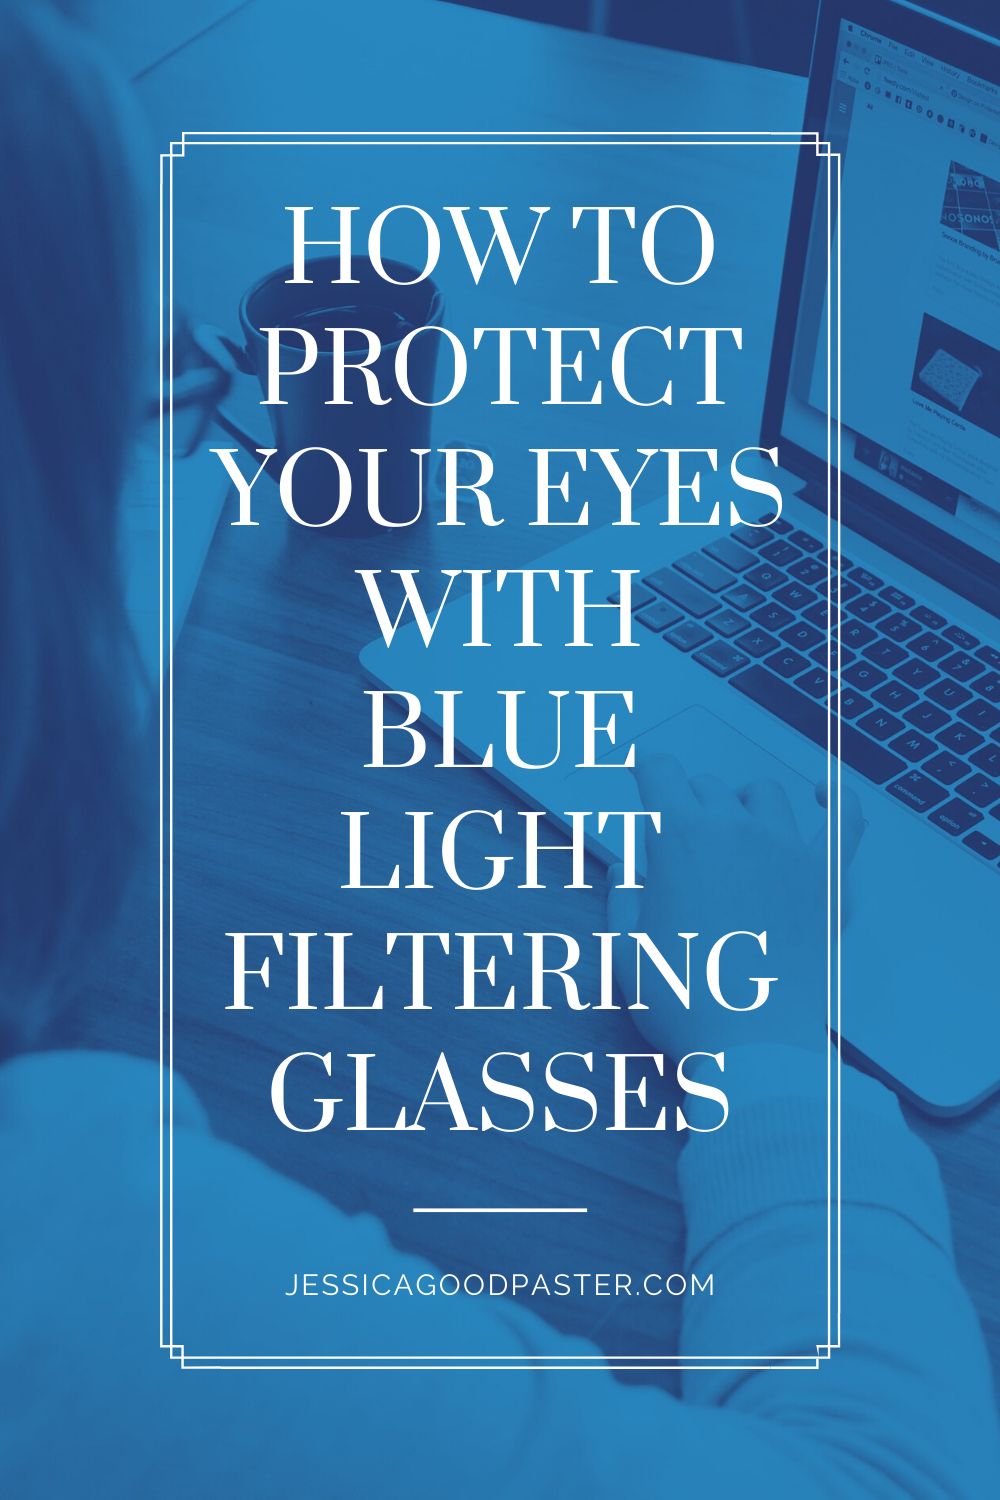 How to Protect Your Eyes with Blue Light Filtering Glasses | The extra screen time from working from home can cause eye strain. Blue light filtering glasses can help protect your vision. Luckily, Warby Parker has affordable and stylish blue light lenses that you'll love. #bluelightglasses #bluelightblockers #workfromhome #glasses #eyewear #warbyparker